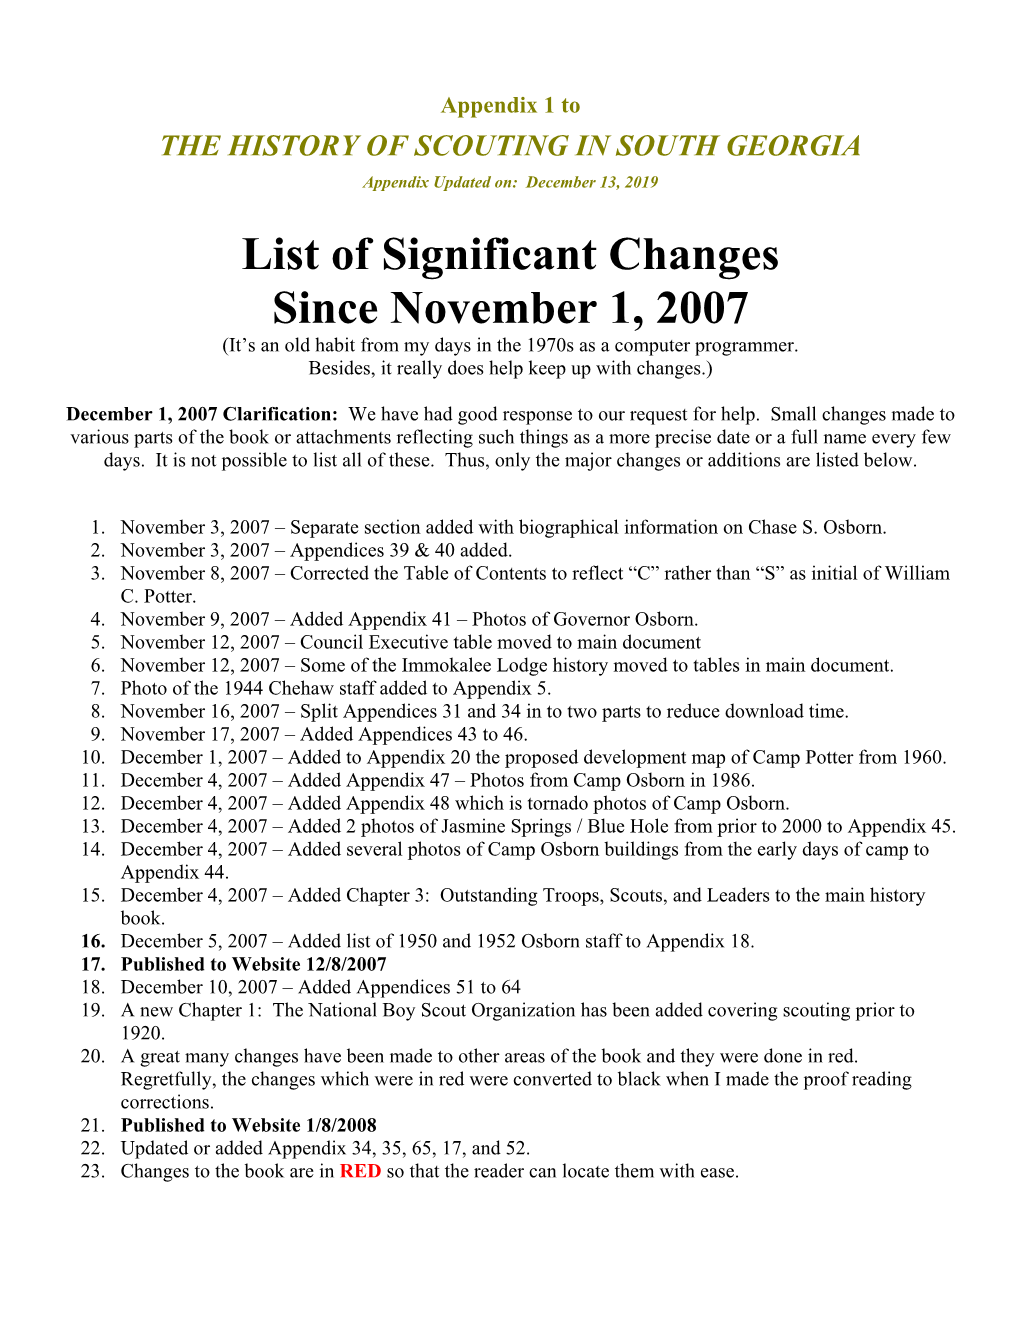 List of Significant Changes Since November 1, 2007 (It’S an Old Habit from My Days in the 1970S As a Computer Programmer